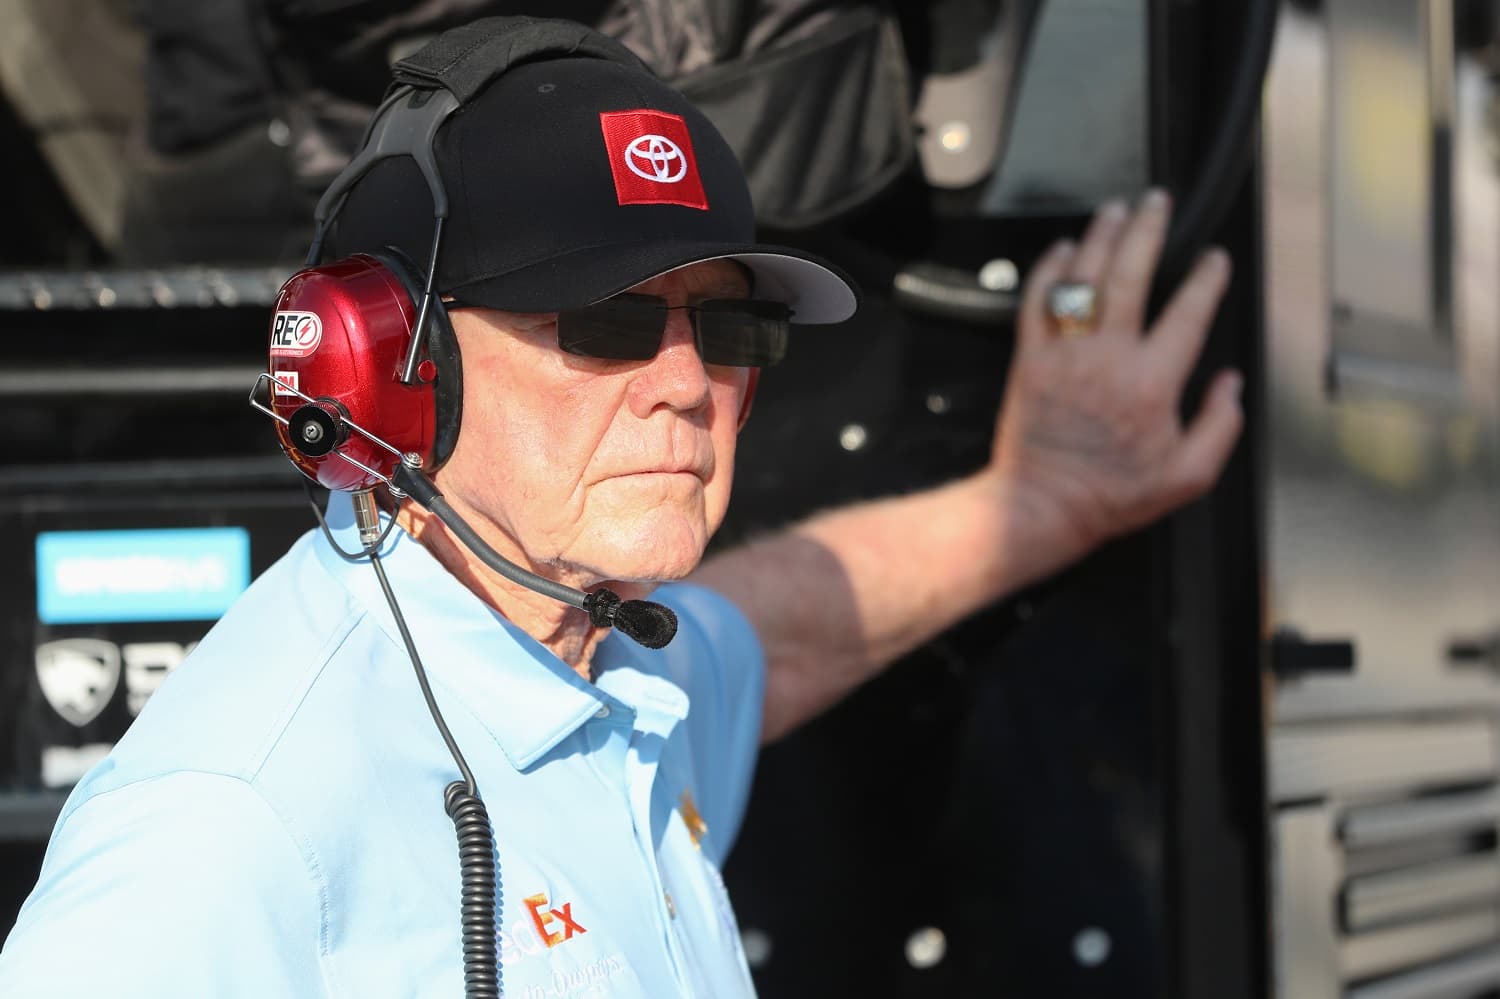 JGR team owner and Hall of Famer Joe Gibbs looks on during the NASCAR Cup Series Goodyear 400 at Darlington Raceway on May 14, 2023. | David Jensen/Getty Images